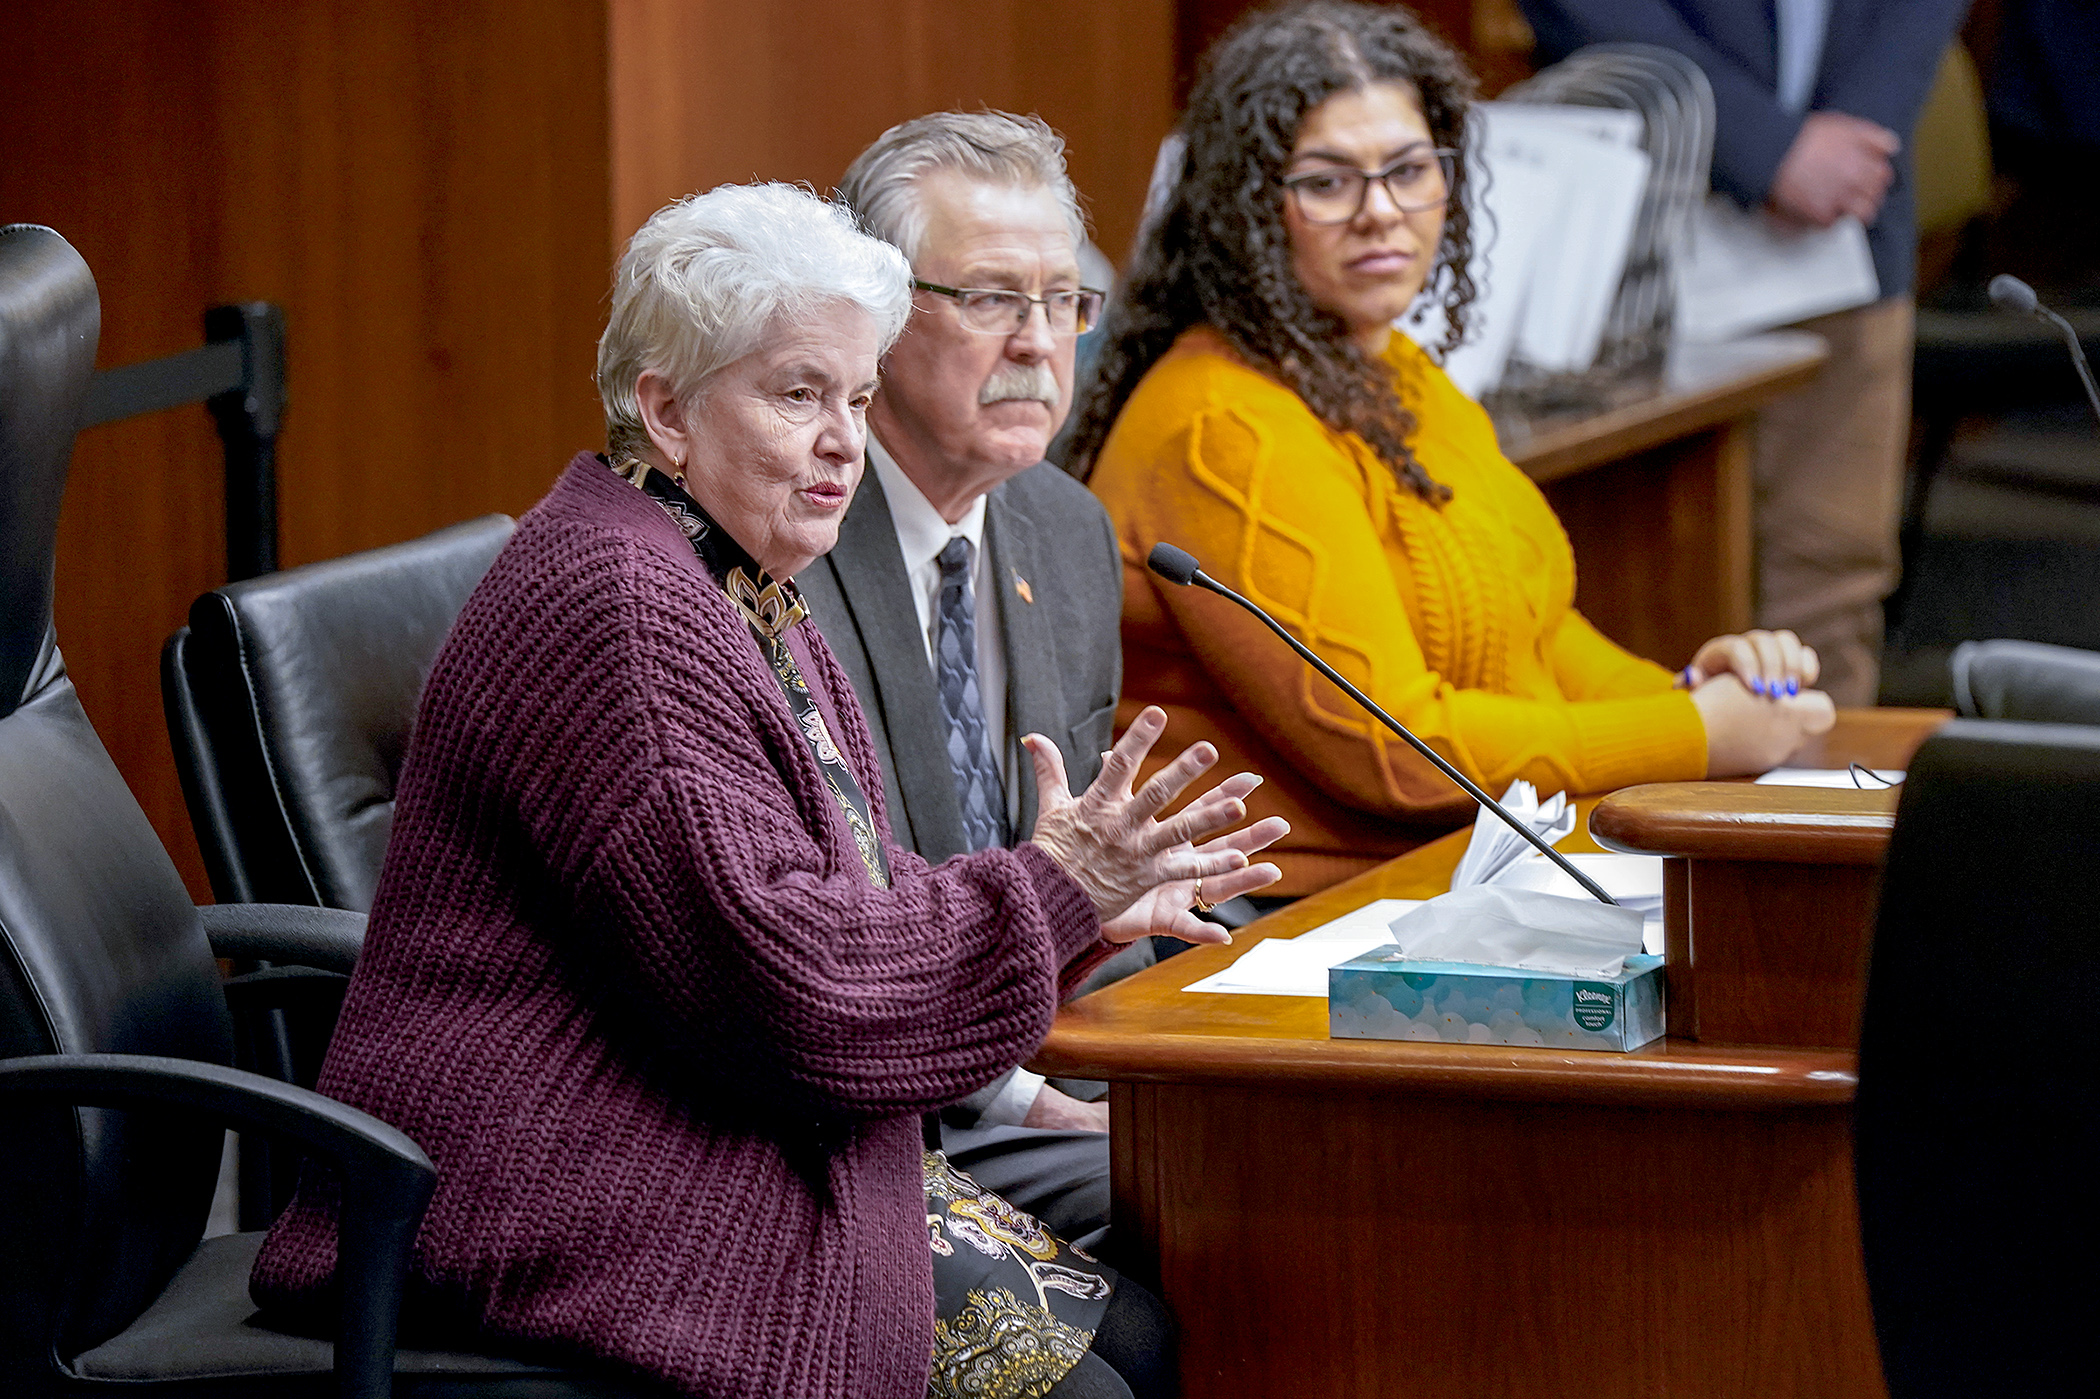 Ramsey County Commissioner Victoria Reinhardt testifies March 27 before the House Climate and Energy Finance and Policy Committee in support of HF4938. Also pictured are Washington County Commissioner Fran Miron and bill sponsor Rep. Athena Hollins. (Photo by Michele Jokinen)